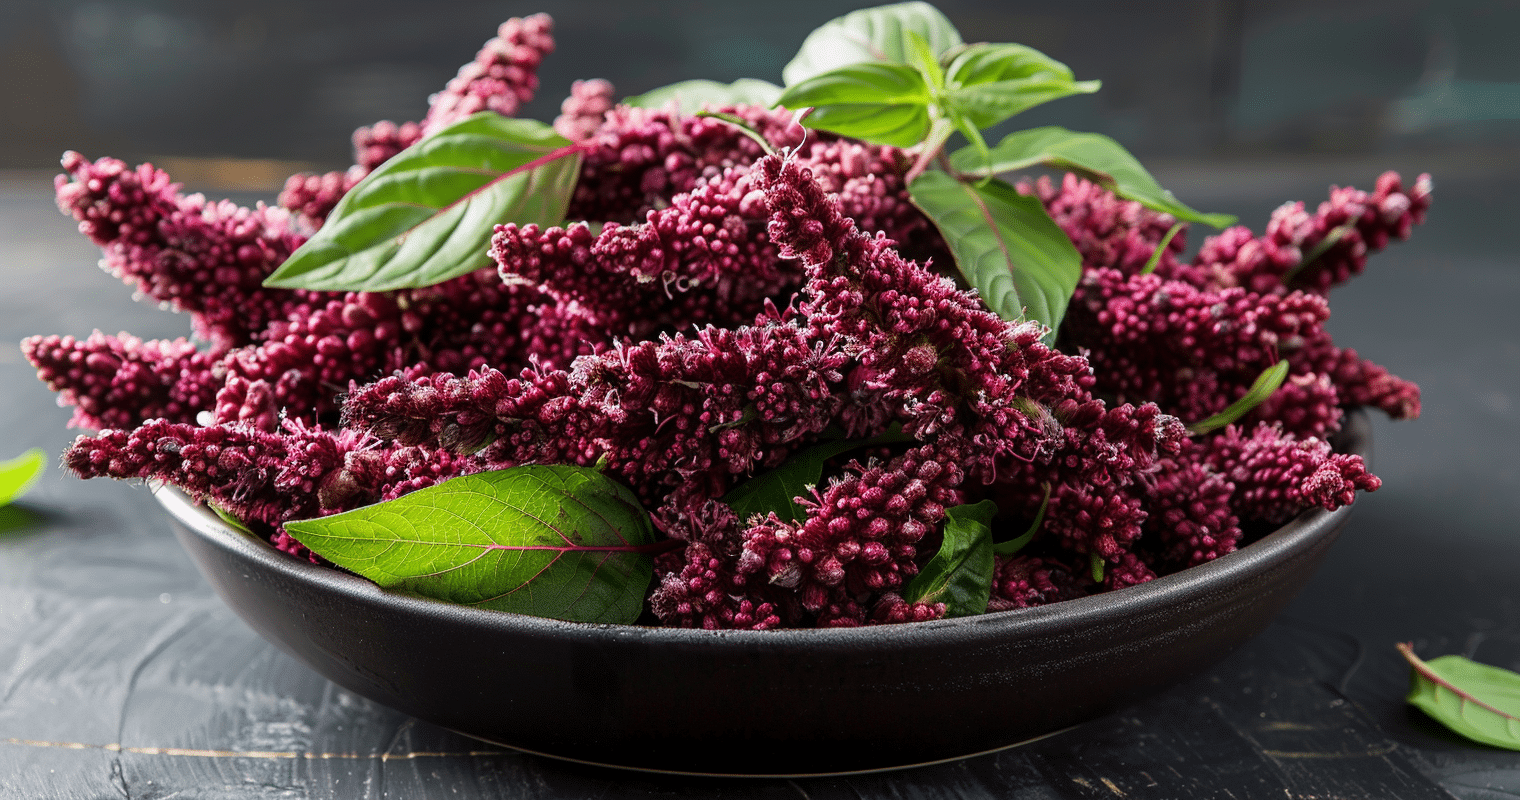 amaranth interactions with medication